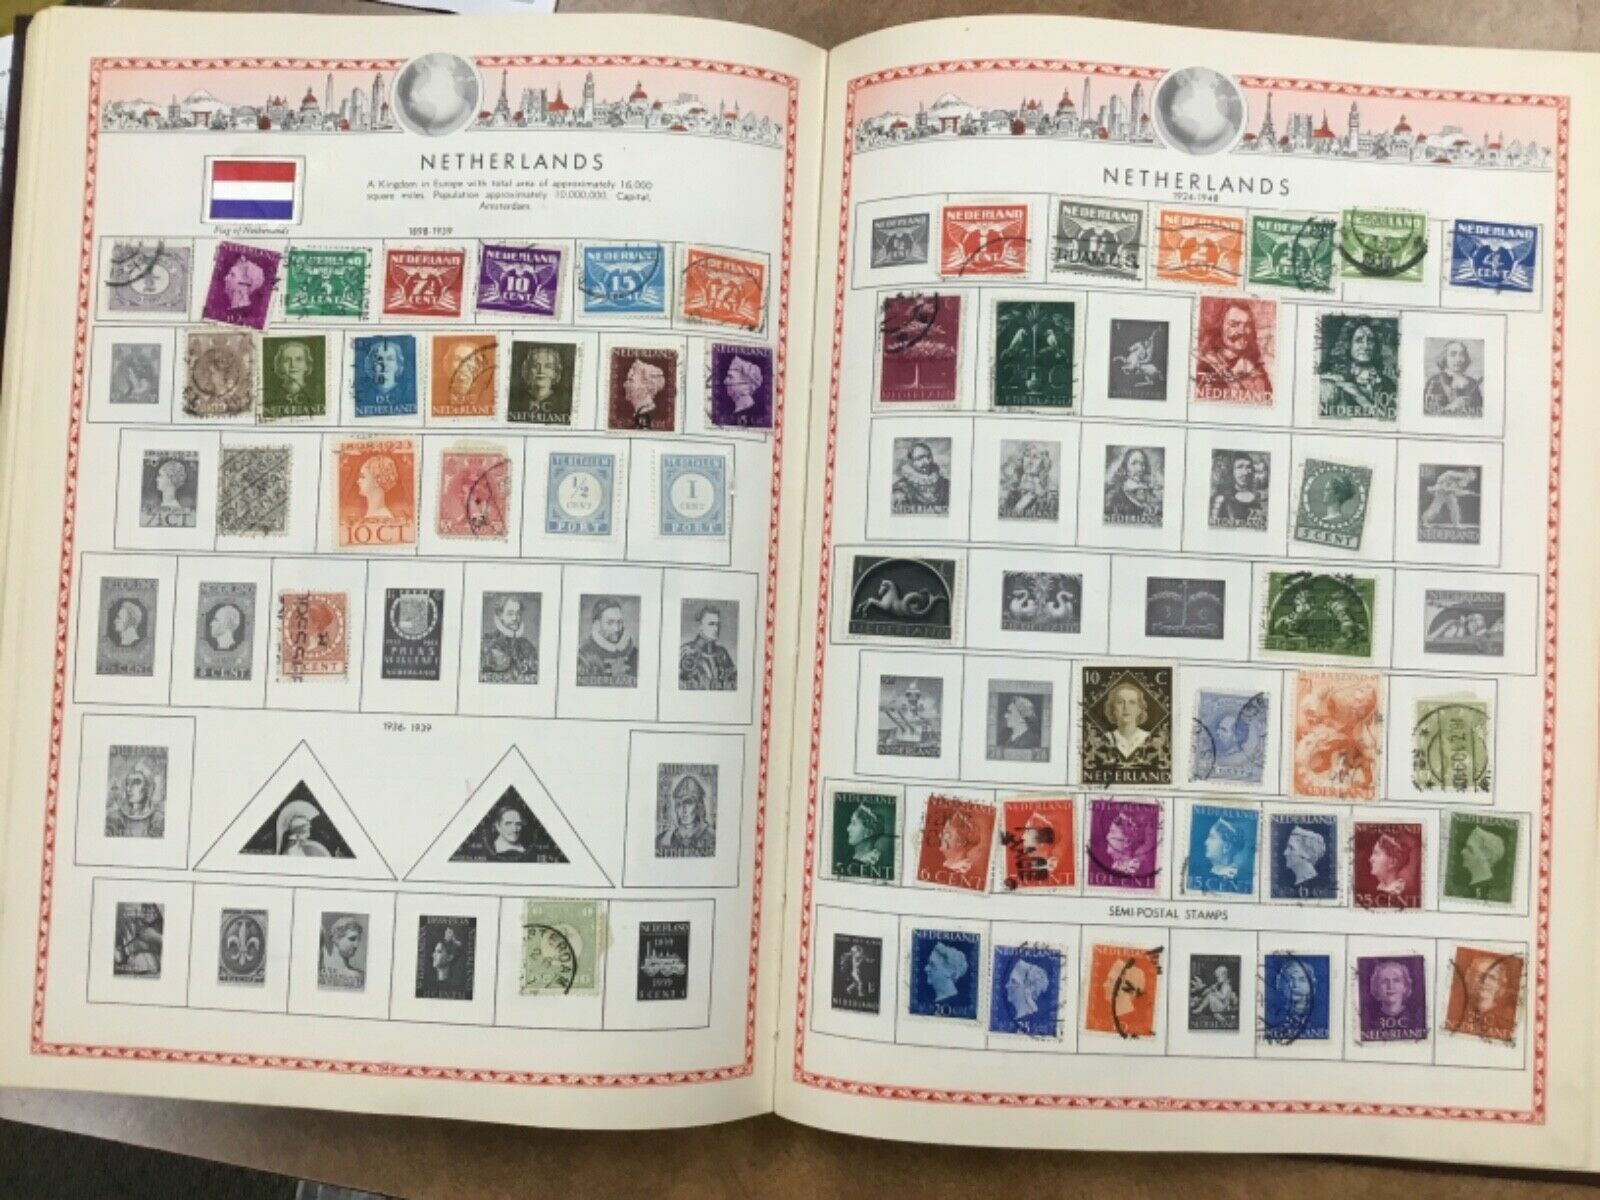 Coles Tpb Guide to Stamp Collecting  Publications & Supplies -  Publications, Stamp / HipStamp